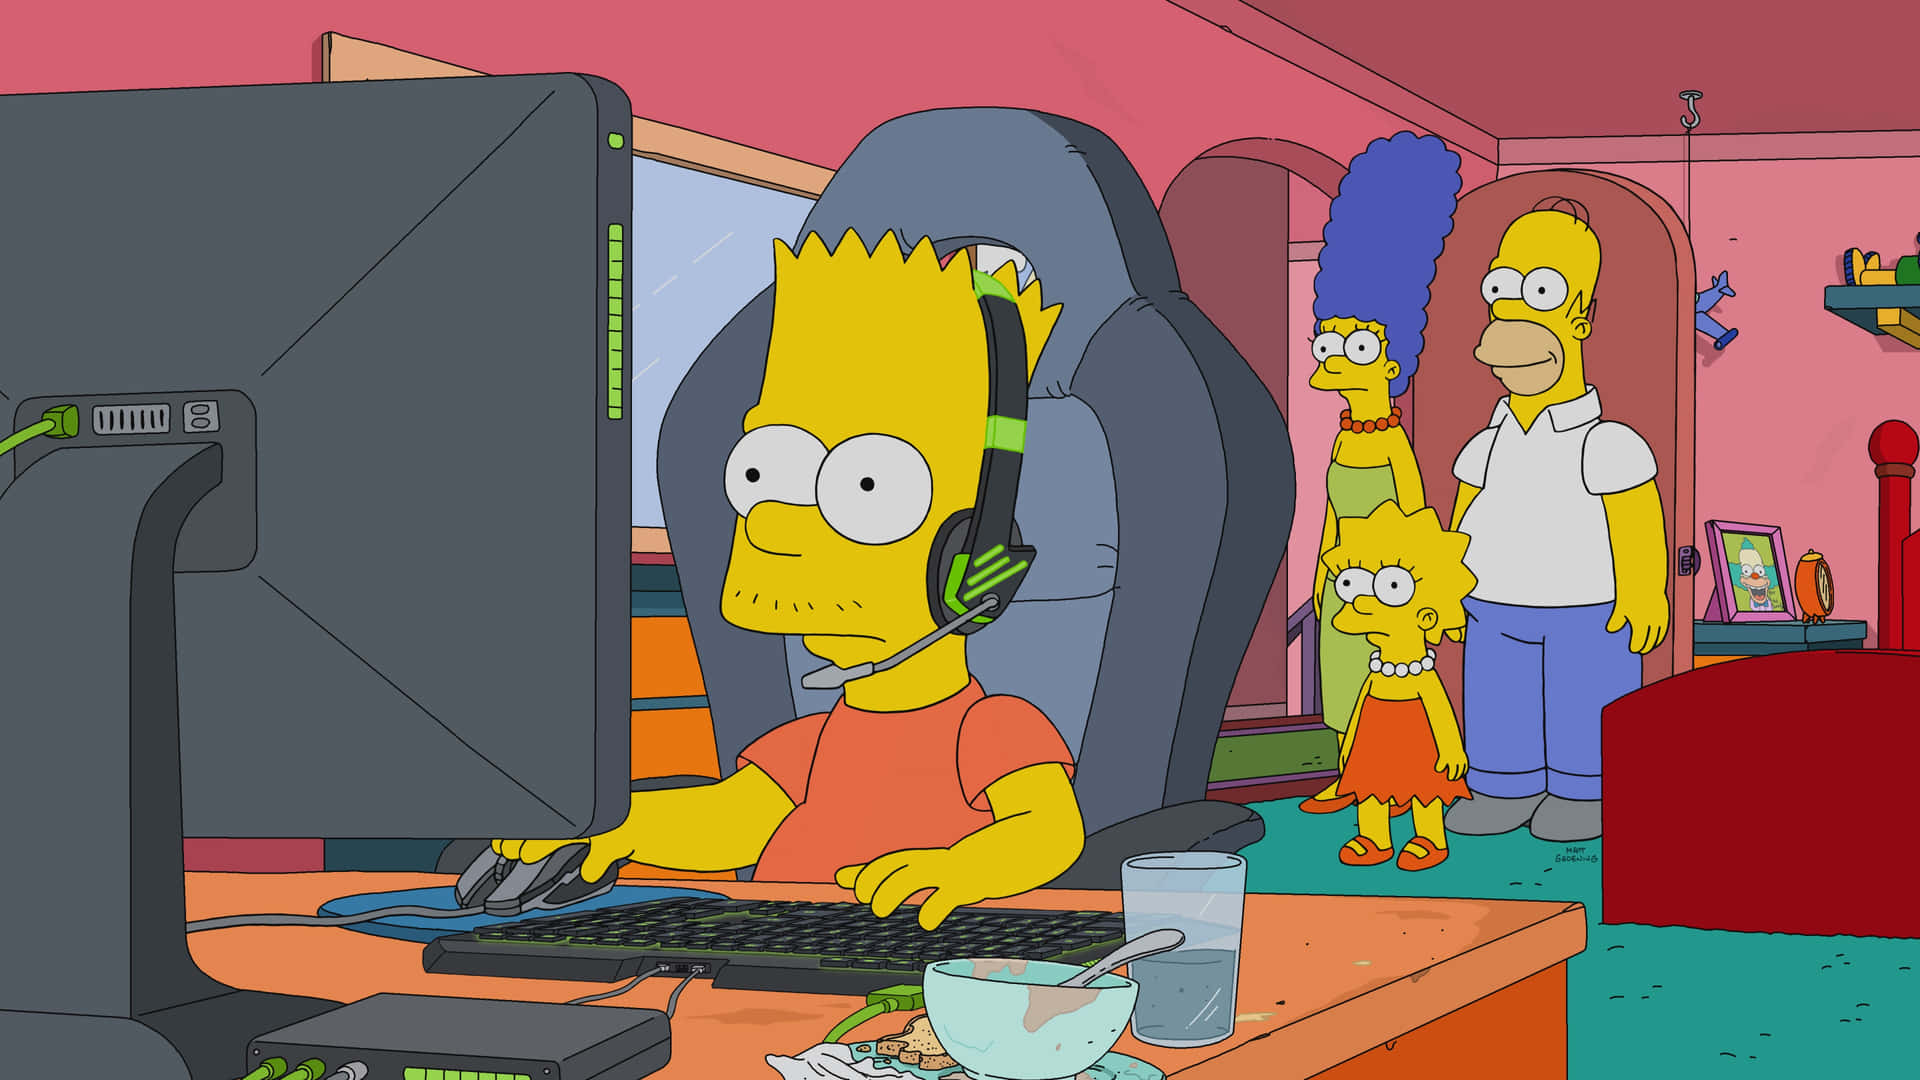 Unleash your gaming skills with The Simpsons PC Wallpaper